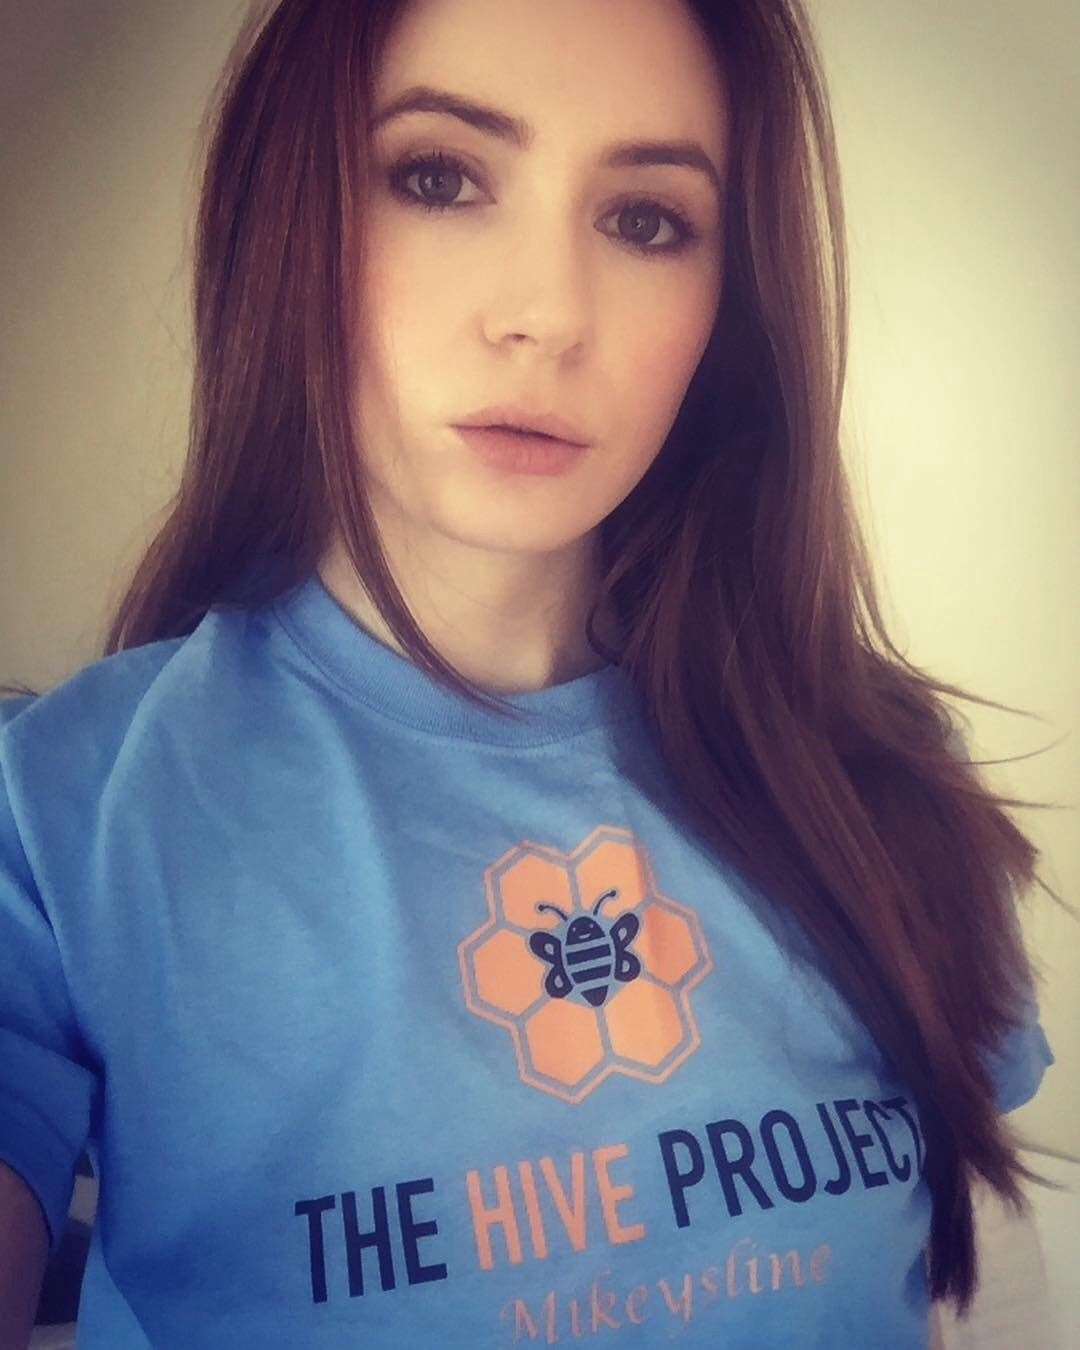 Karen Gillan posted a picture of herself in a Hive Project t-shirt to promote its work.